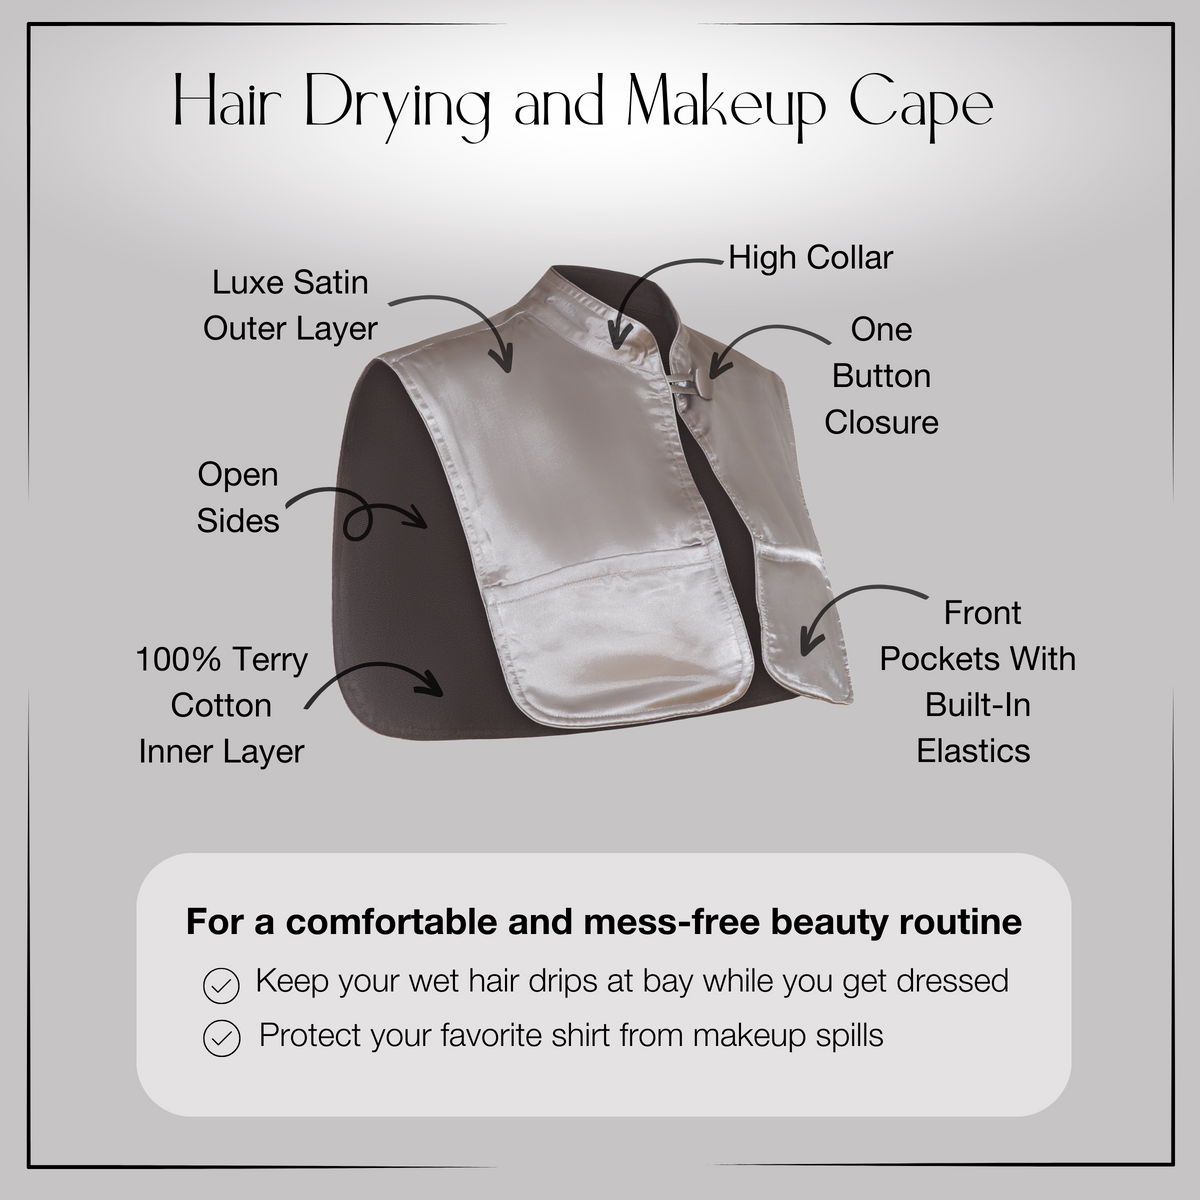 Monii Hair Drying and Makeup Cape, Silver Satin